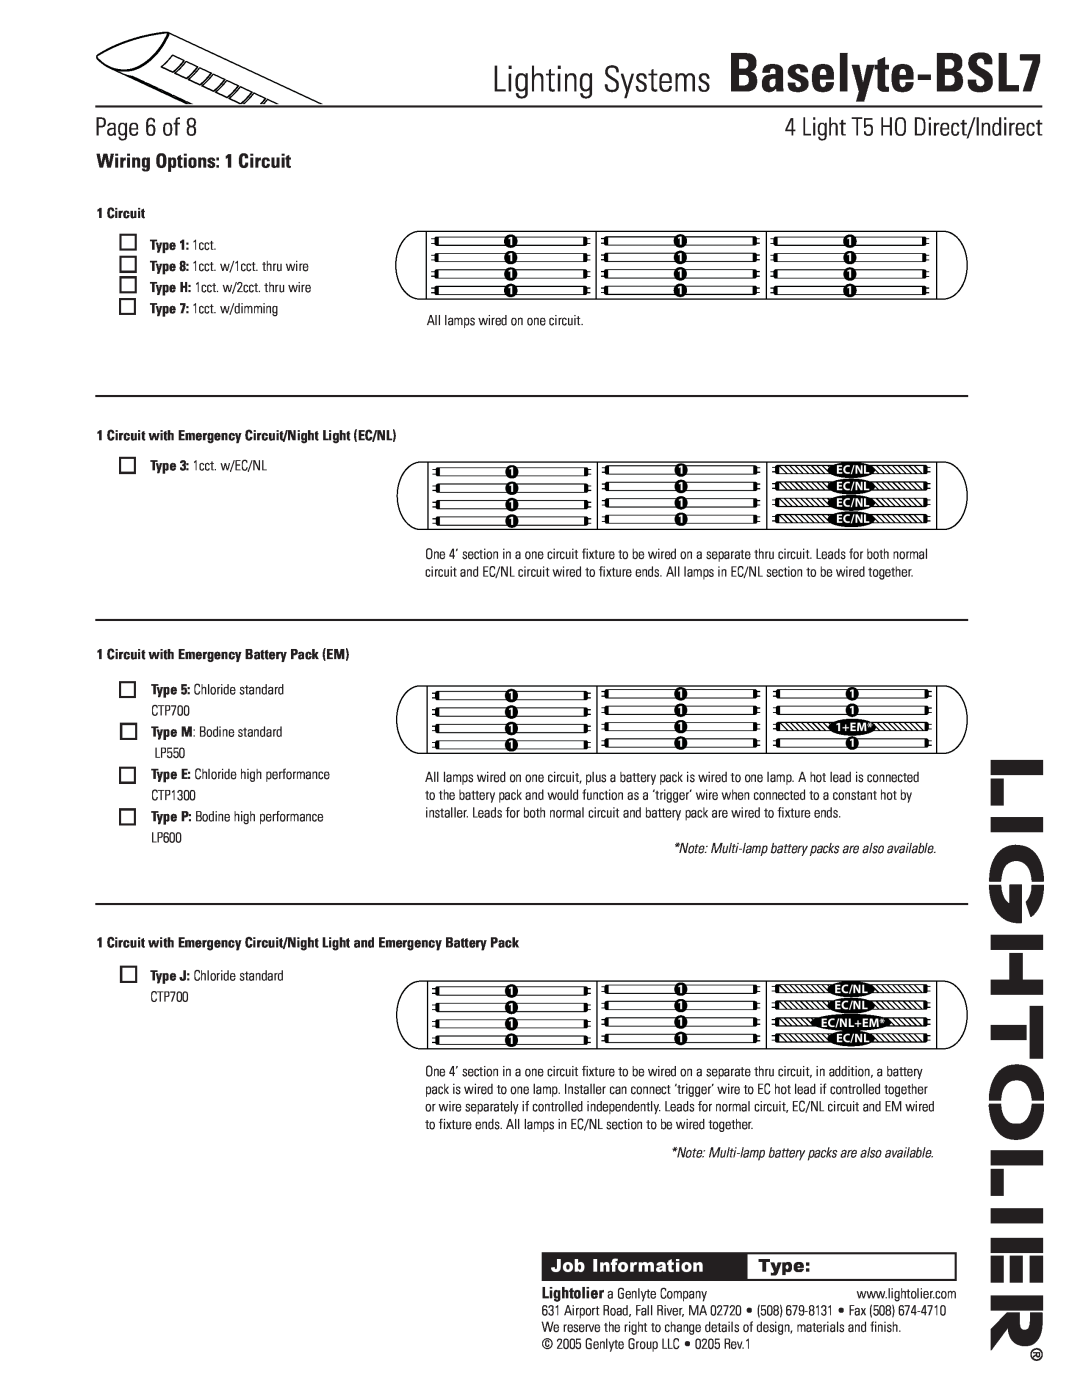 Lightolier Baselyte-BSL7 Wiring Options 1 Circuit, Circuit Type 1 1cct, Circuit with Emergency Battery Pack EM, Page of 